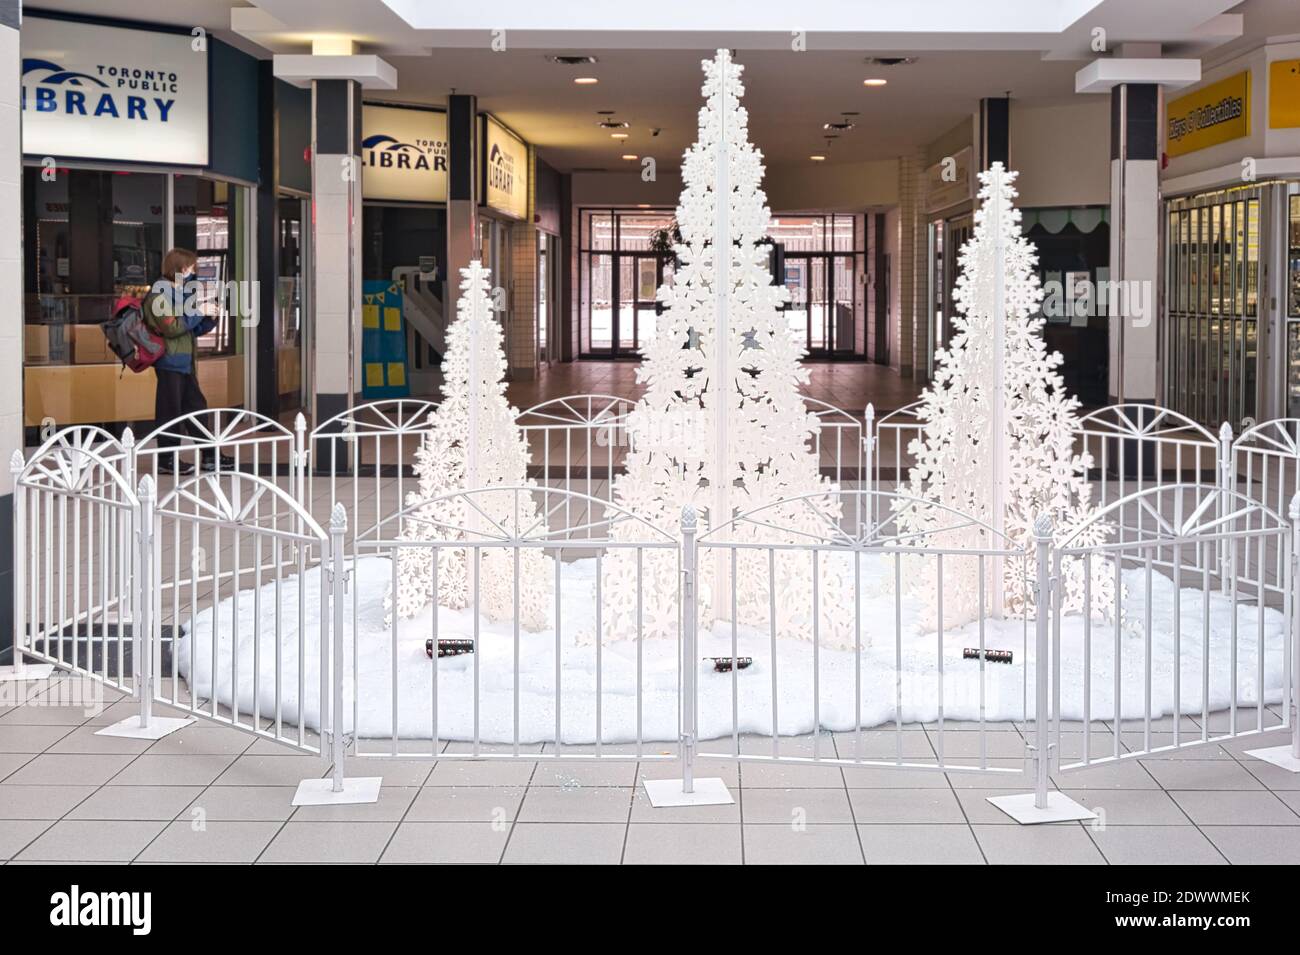 Christmas signs on an empty shopping mall during the Covid-19 pandemic, Toronto, Canada Stock Photo